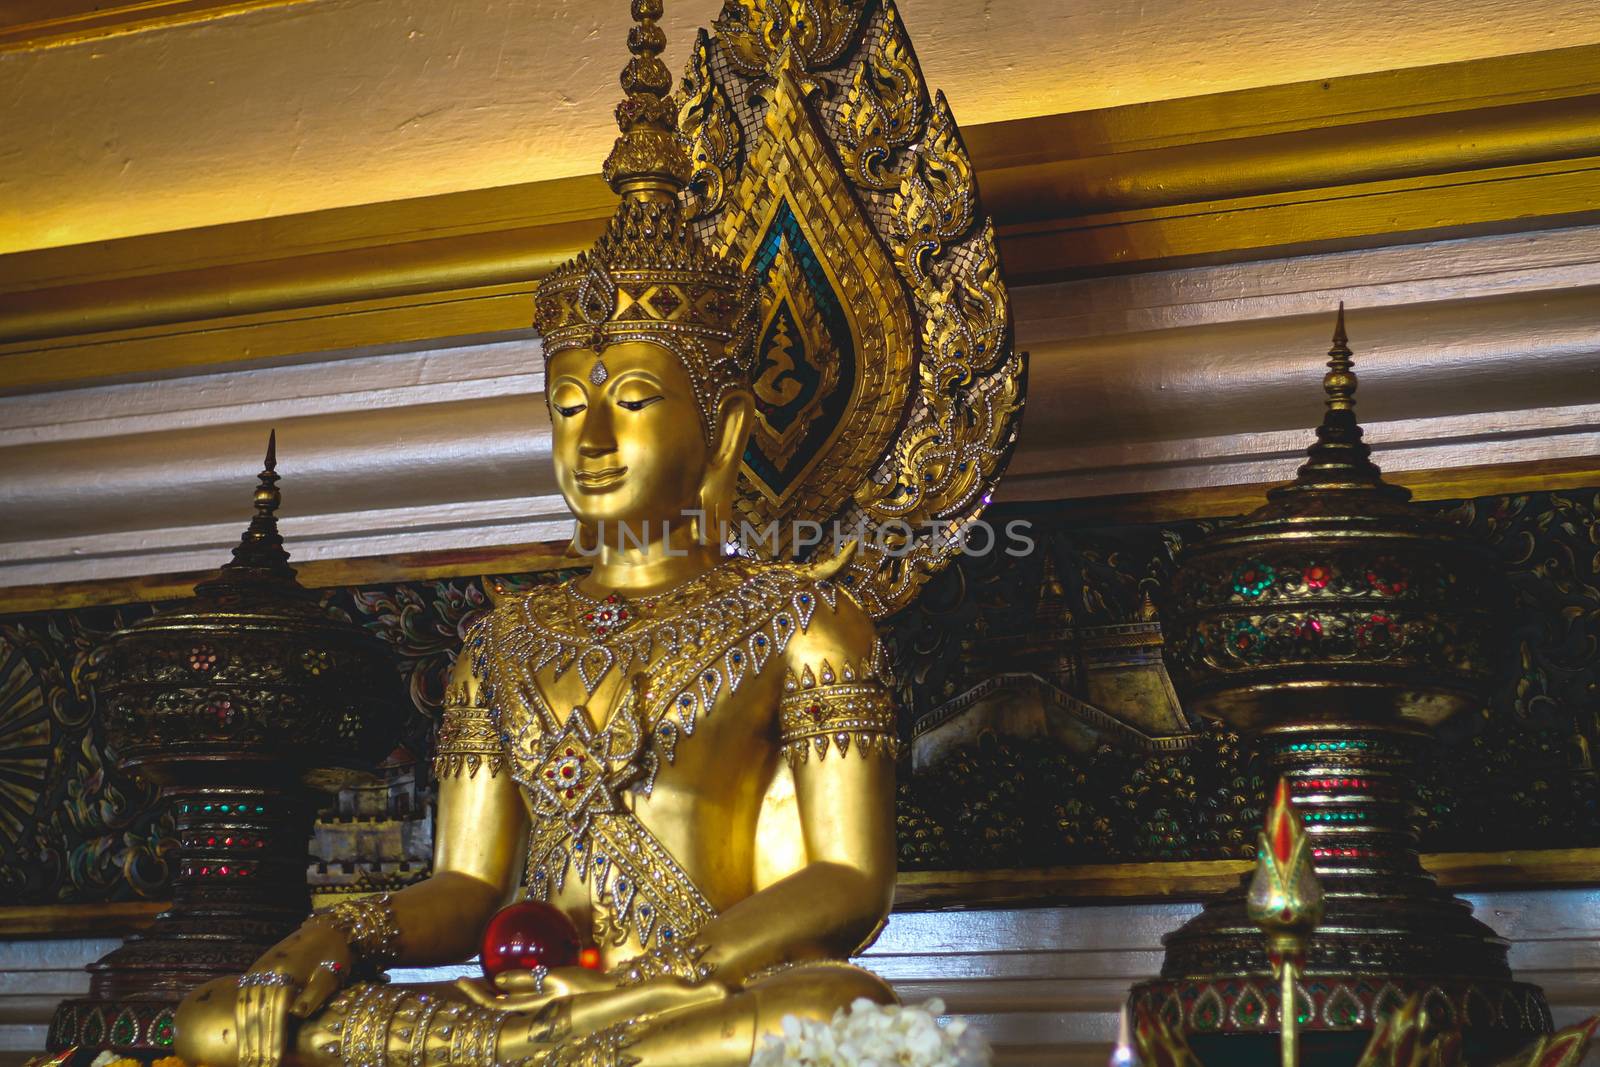 Golden Mahayana Buddhist statue in a public altar in the street of Yaowarat or Chinatown in Bangkok, Thailand